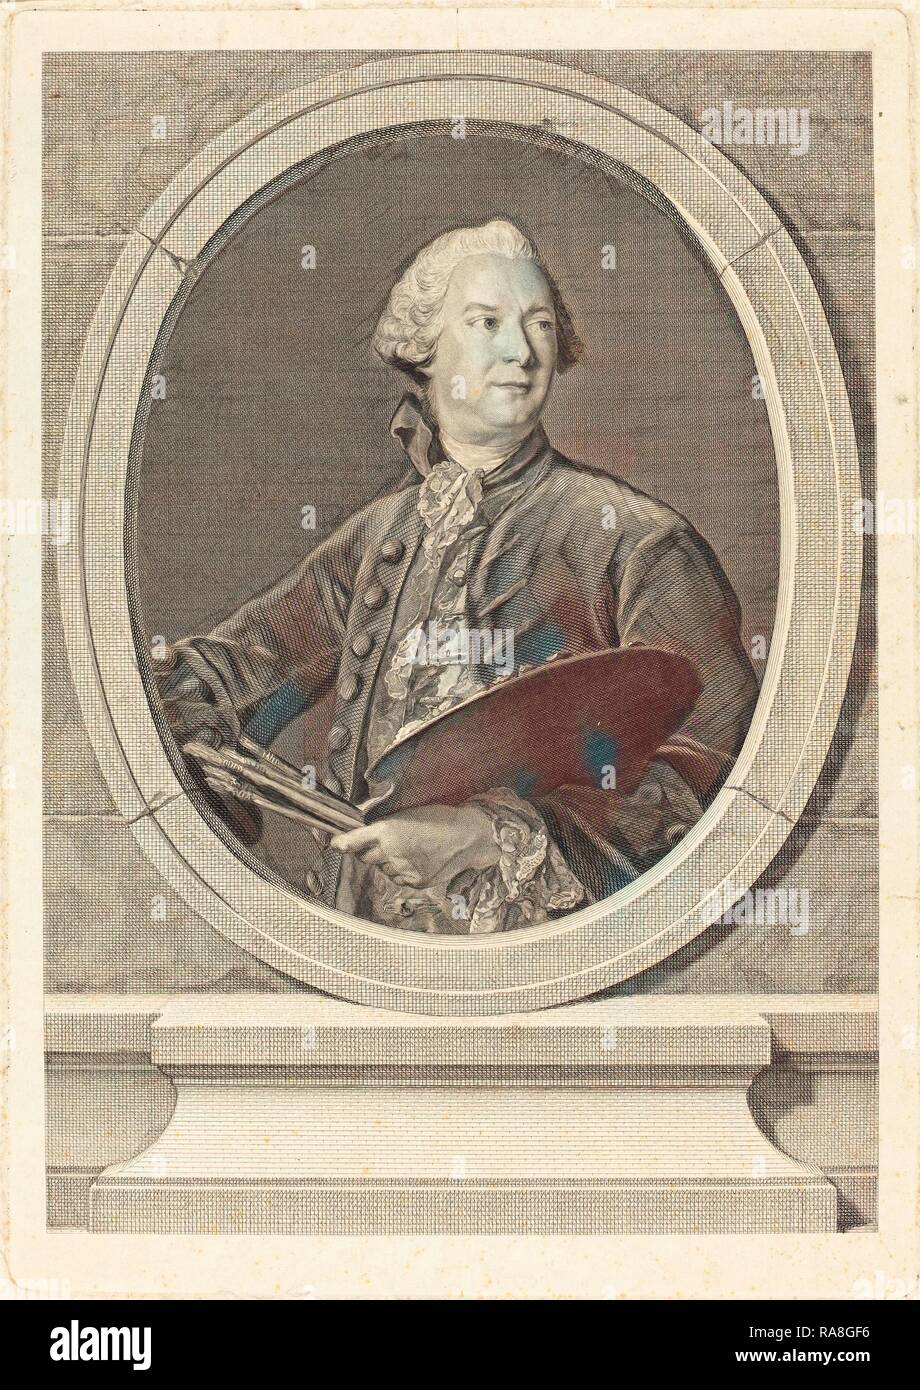 Louis-Jacques Cathelin after Jean-Marc Nattier (French, 1738-1739 - 1804), Louis Tocque, engraving on laid paper reimagined Stock Photo